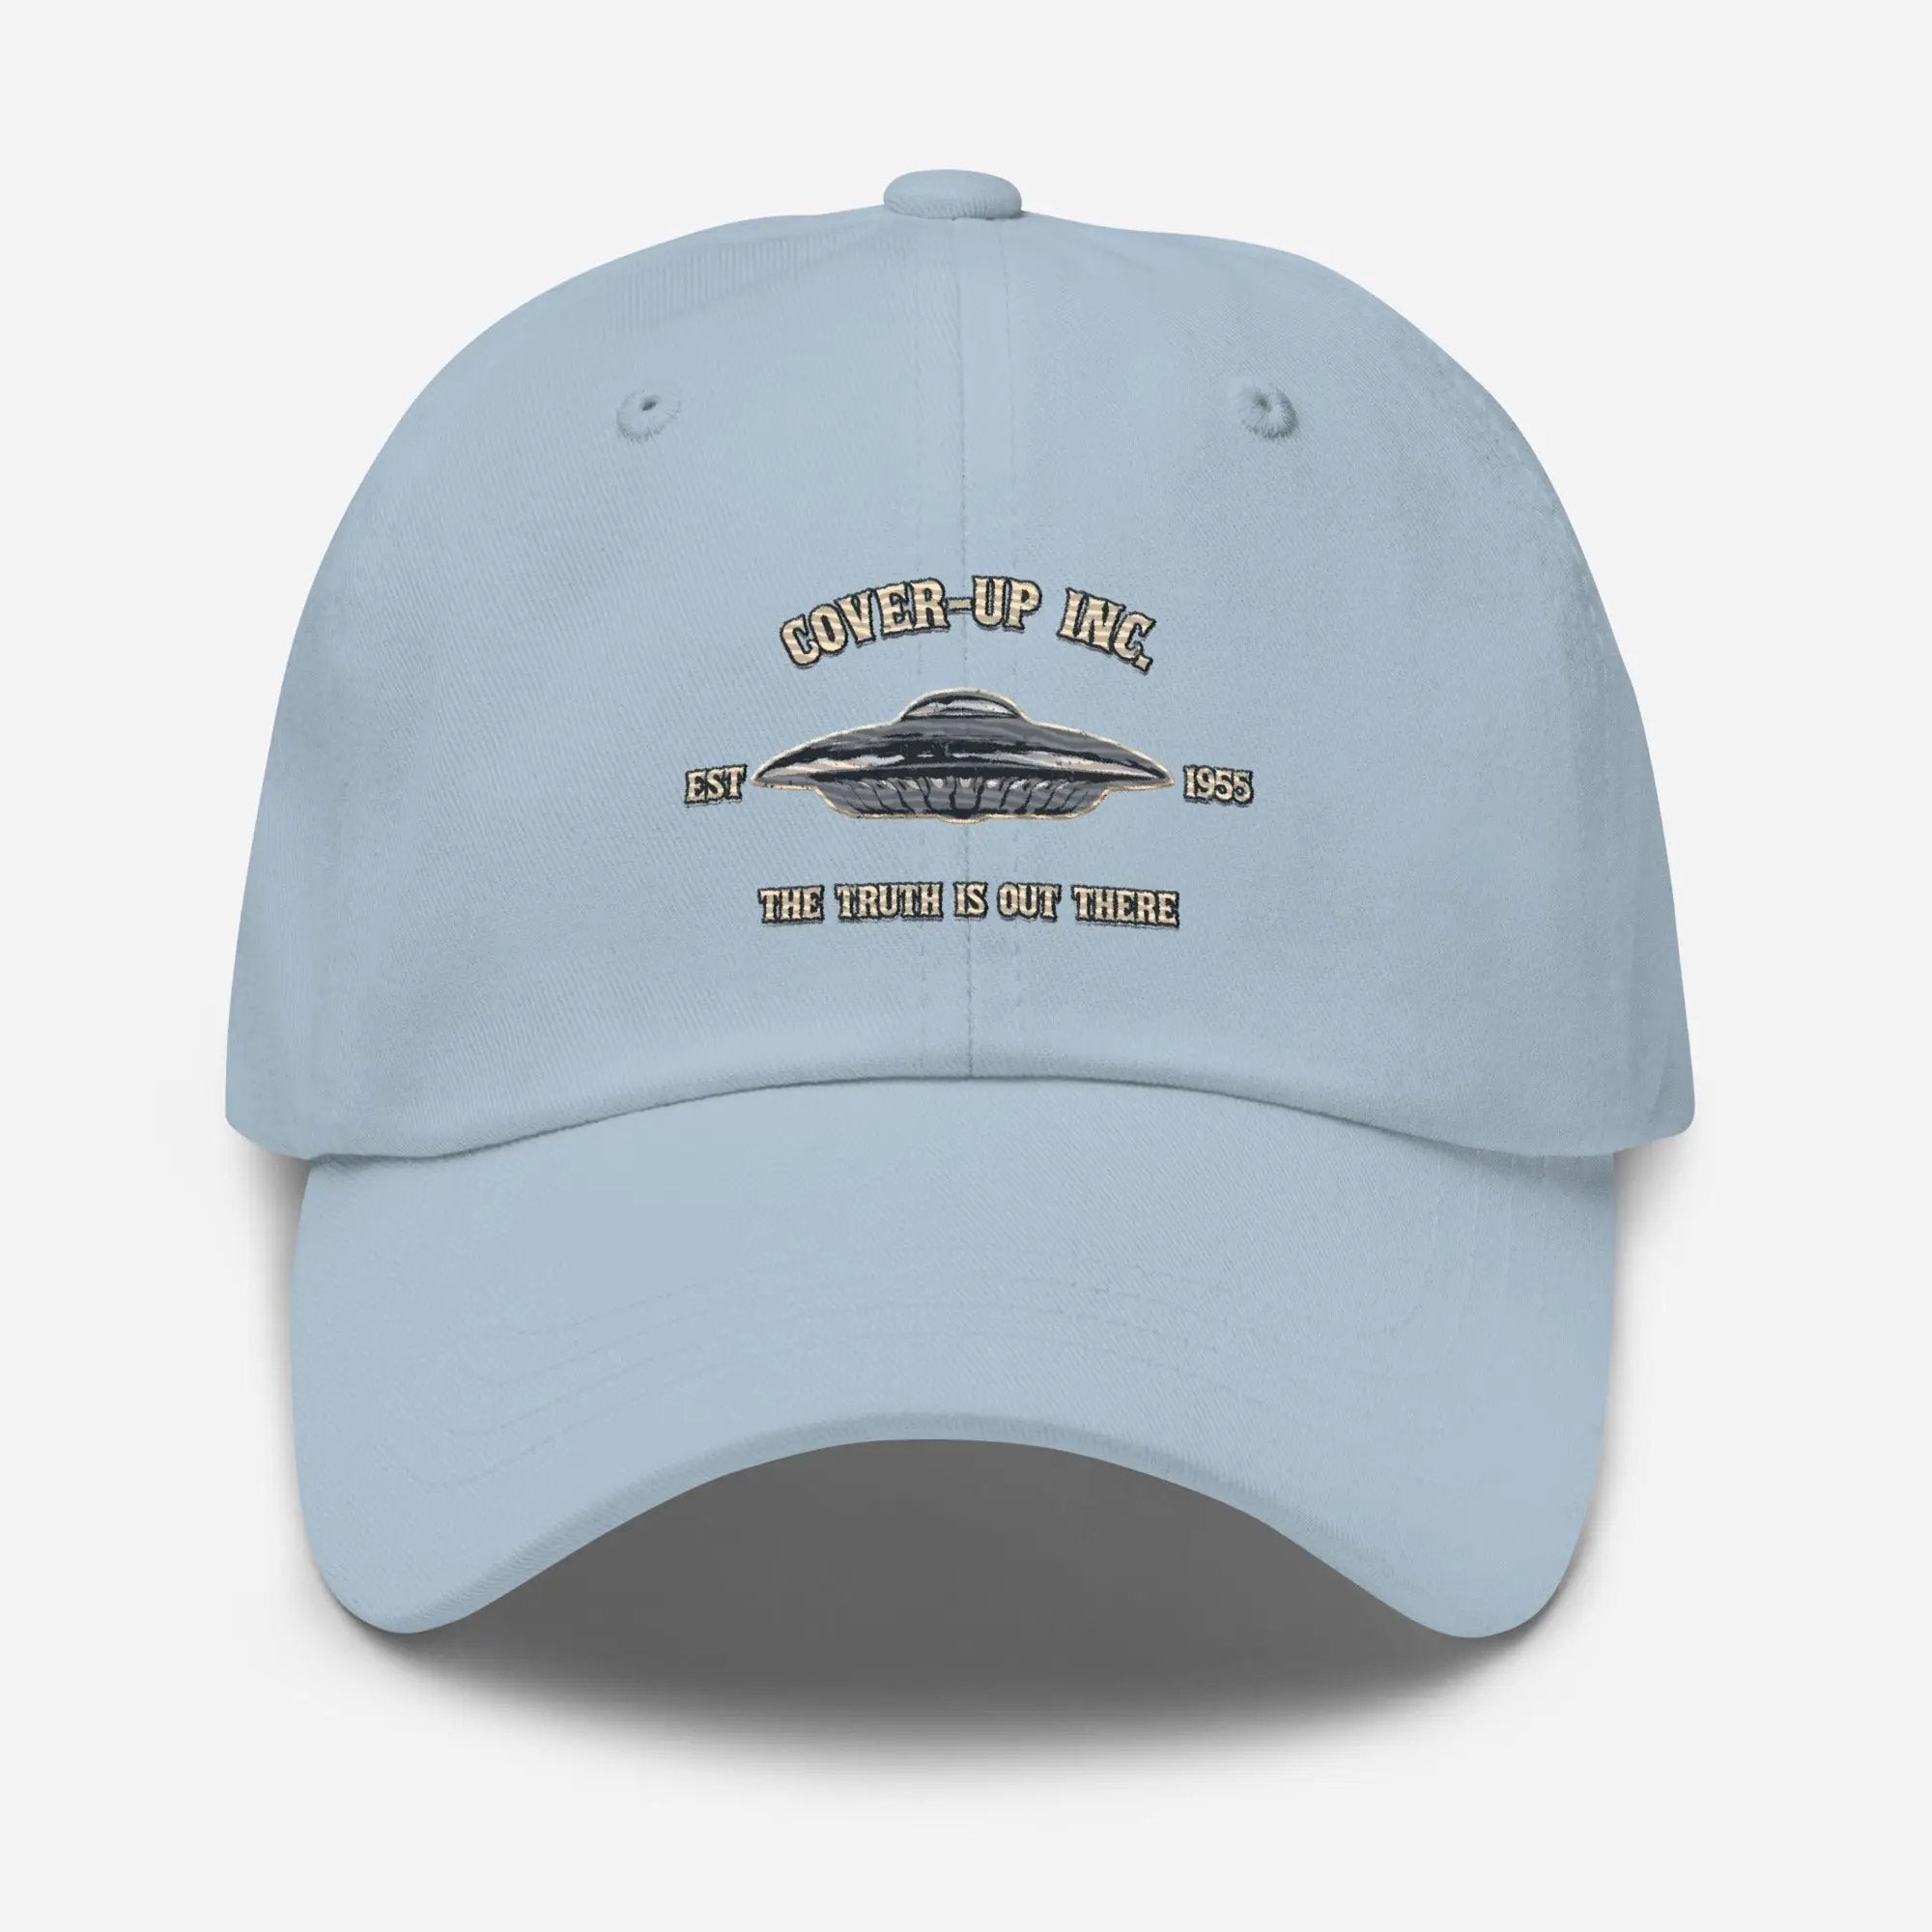 Cover-Up Inc. Dad hat